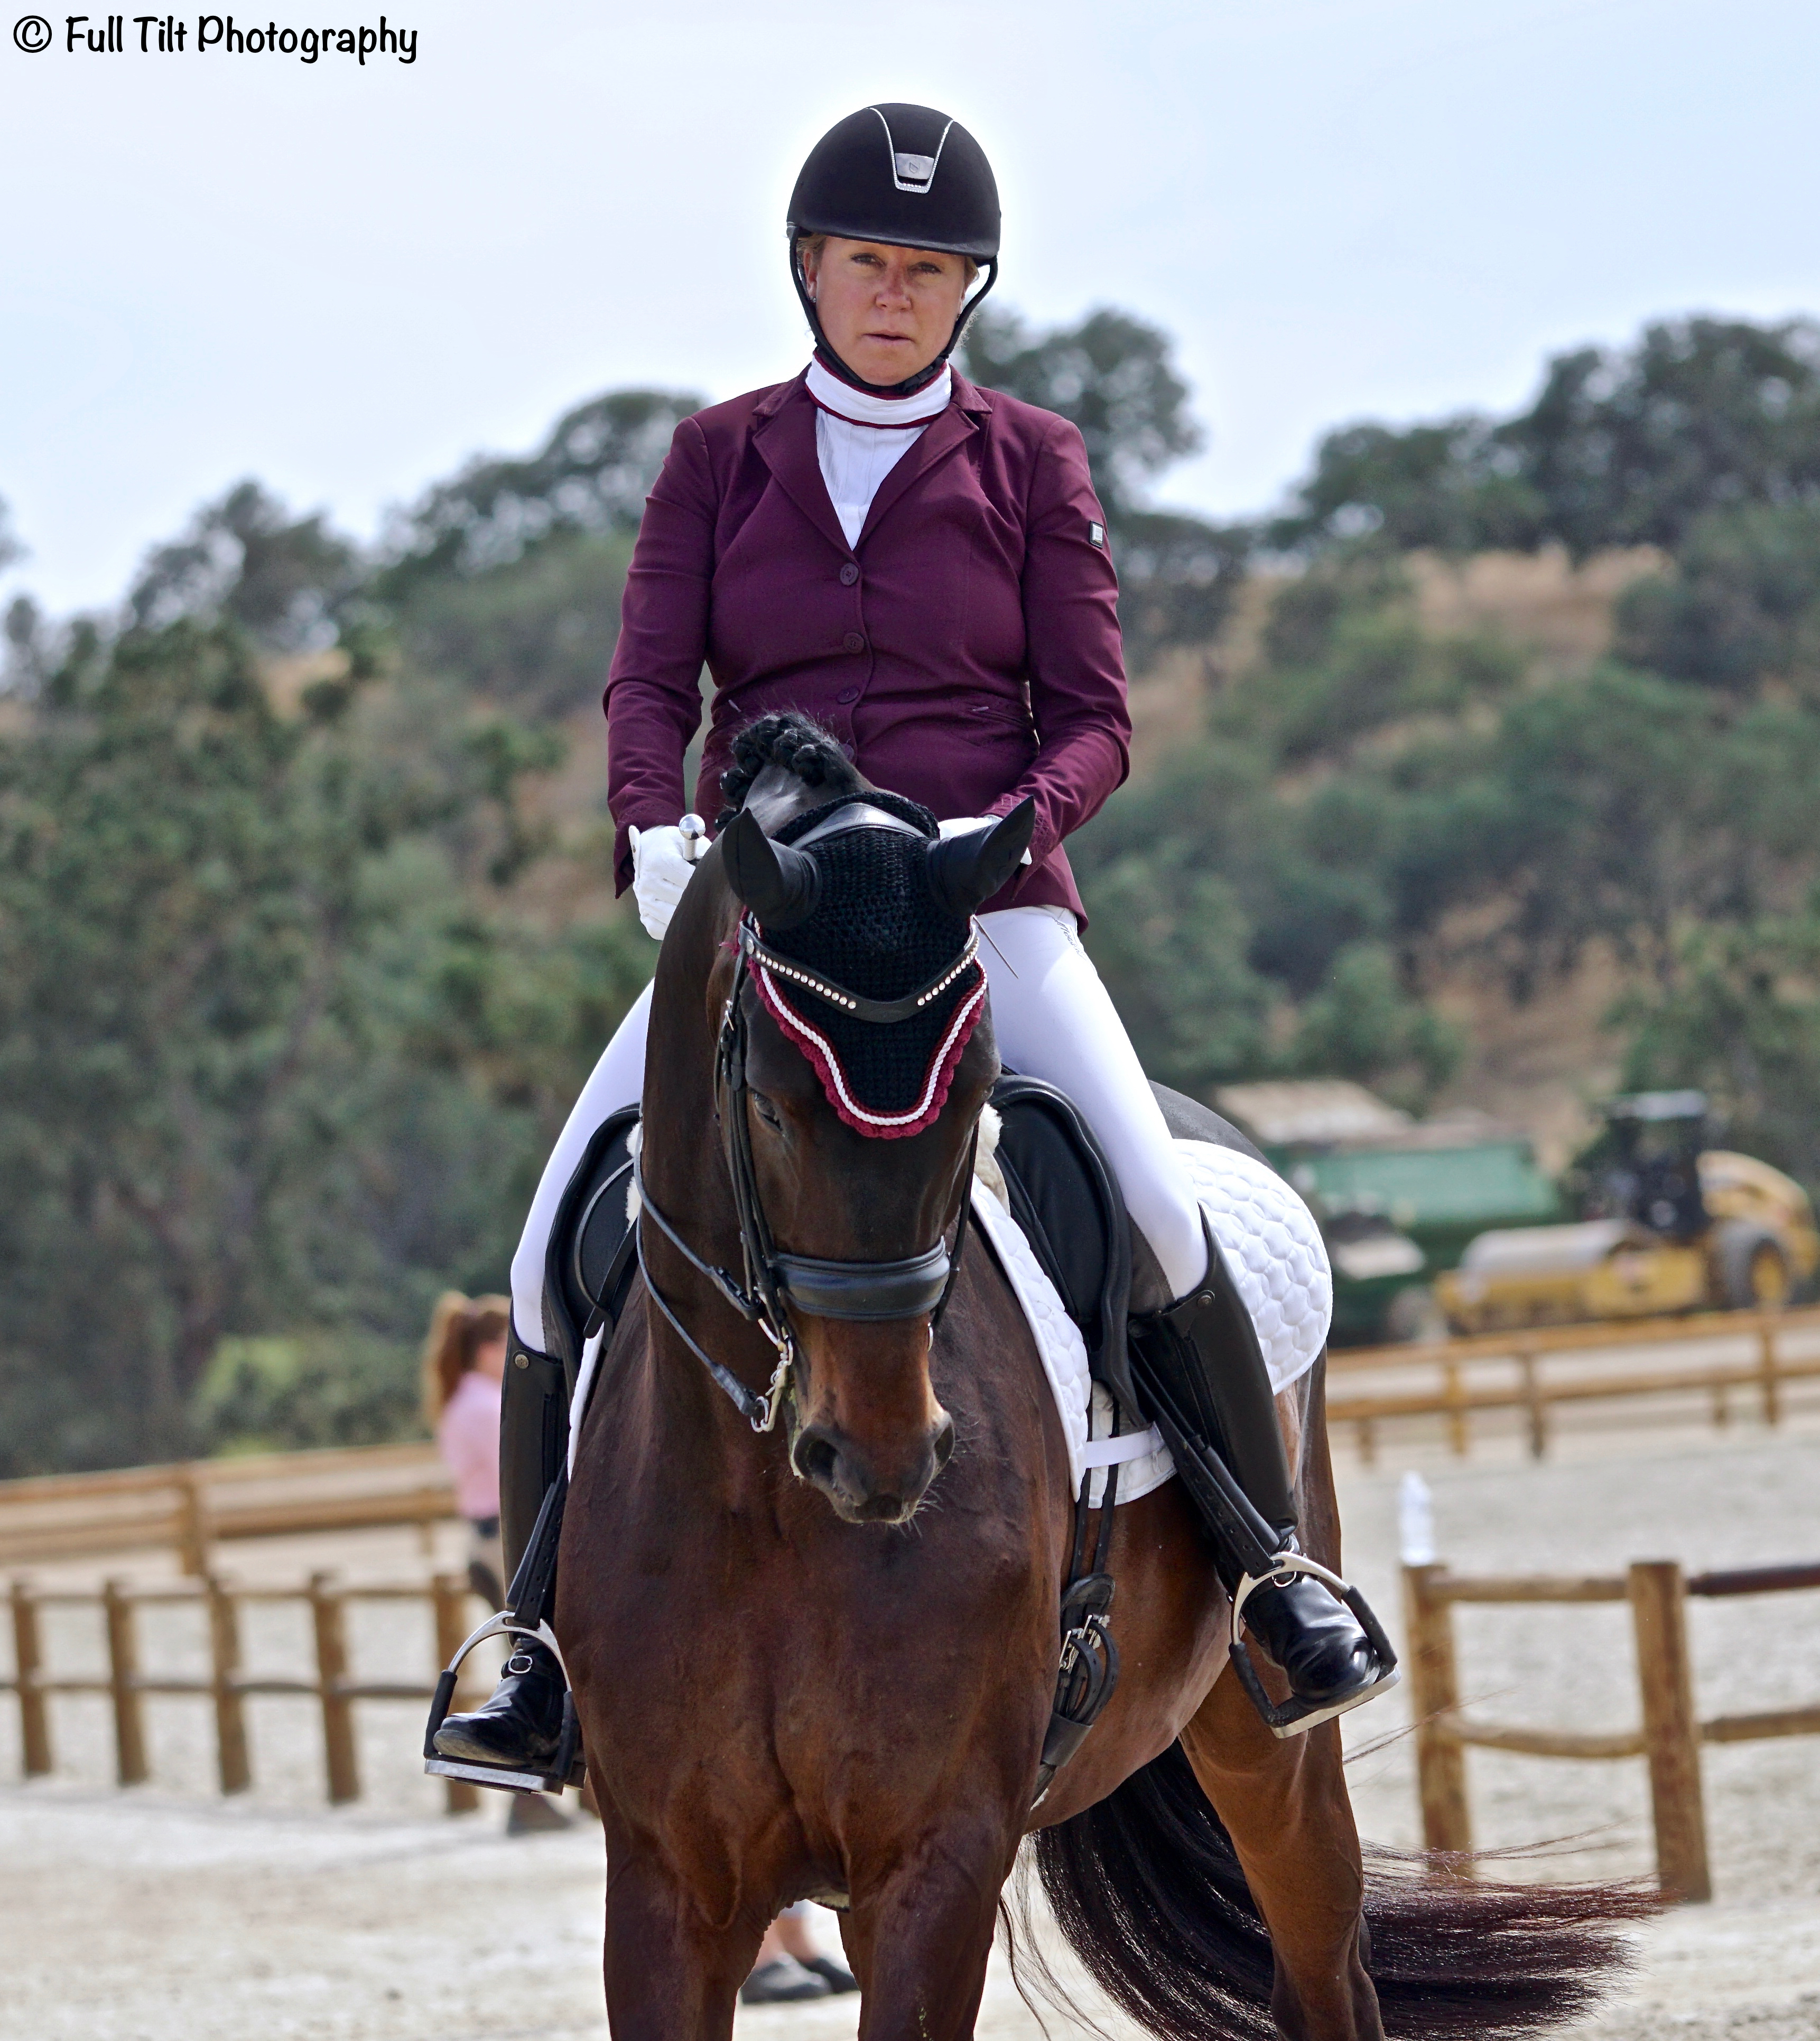 Bending the horse | Eventing